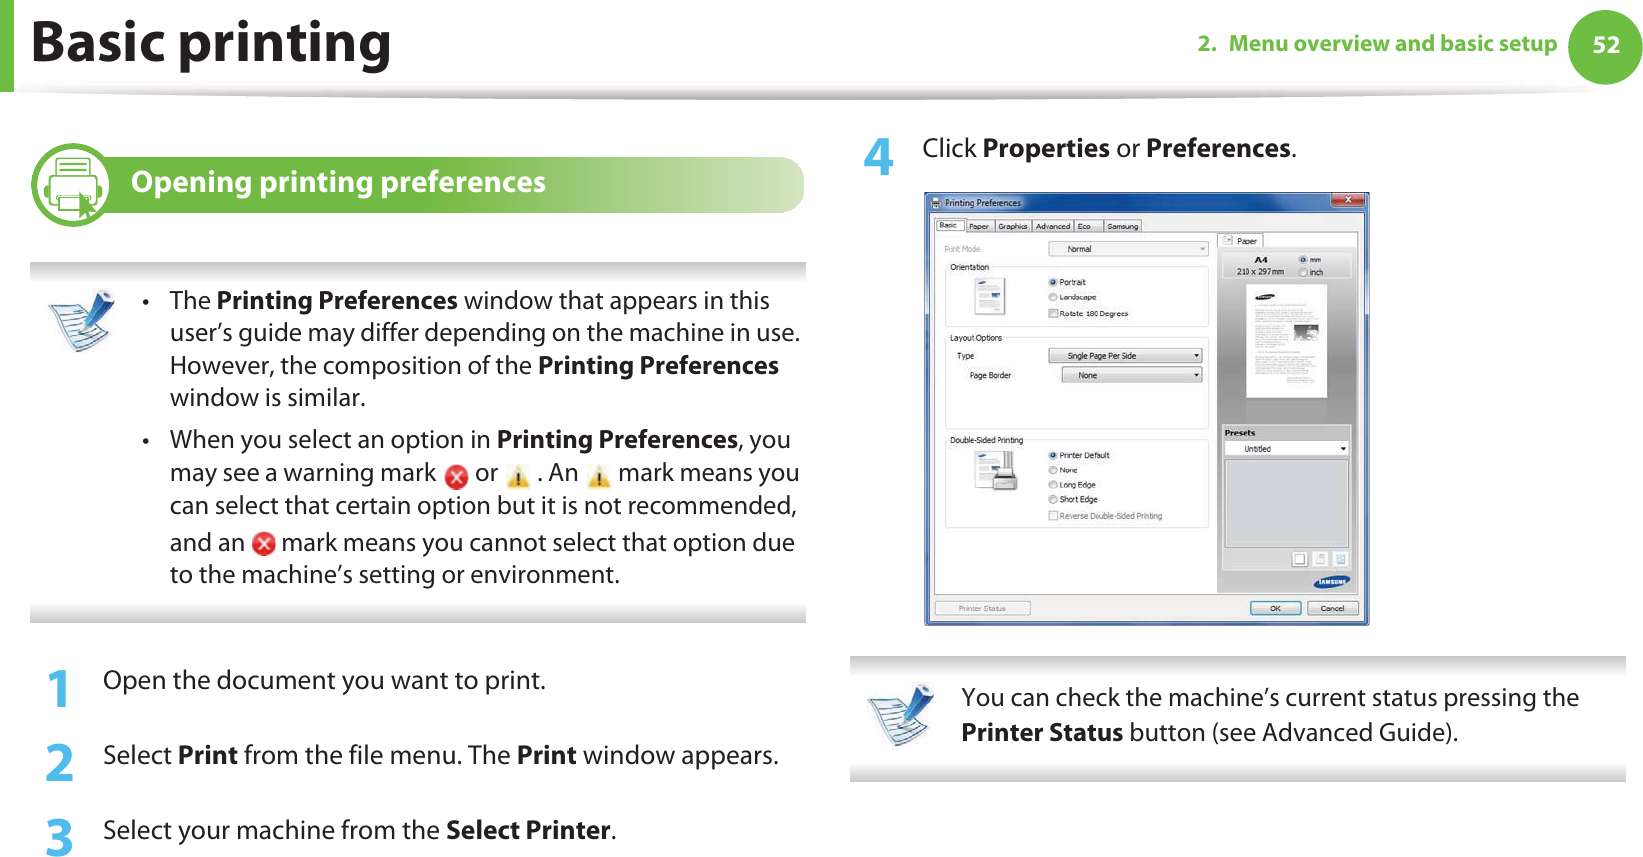 Basic printing 522. Menu overview and basic setup11 Opening printing preferences •The Printing Preferences window that appears in this user’s guide may differ depending on the machine in use. However, the composition of the Printing Preferences window is similar.• When you select an option in Printing Preferences, you may see a warning mark   or   . An   mark means you can select that certain option but it is not recommended, and an   mark means you cannot select that option due to the machine’s setting or environment. 1Open the document you want to print.2  Select Print from the file menu. The Print window appears. 3  Select your machine from the Select Printer. 4  Click Properties or Preferences.  You can check the machine’s current status pressing the Printer Status button (see Advanced Guide). 